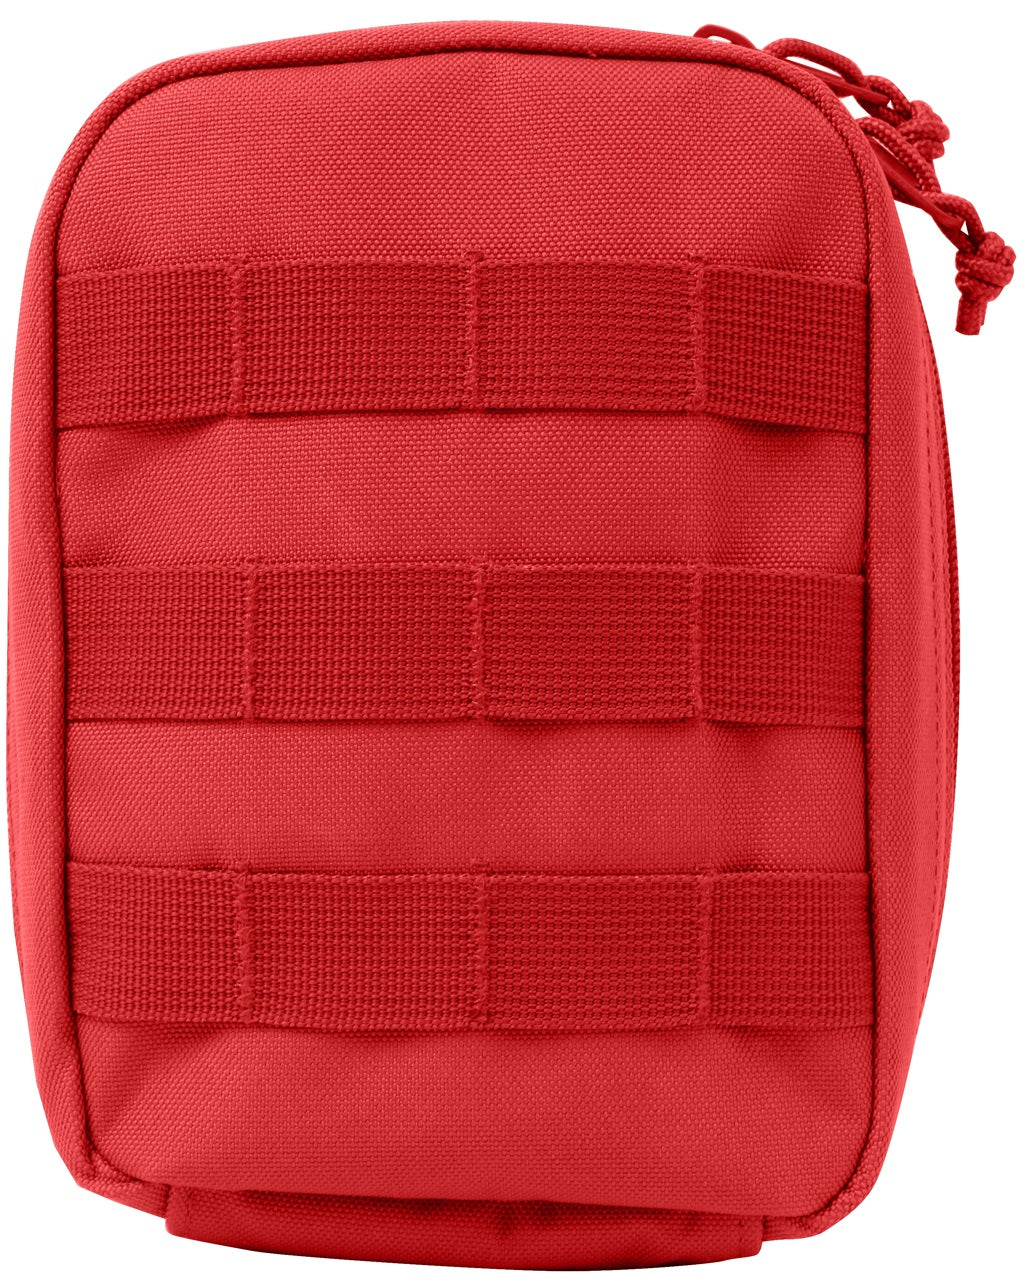 Rothco MOLLE Tactical First Aid Kit - Red